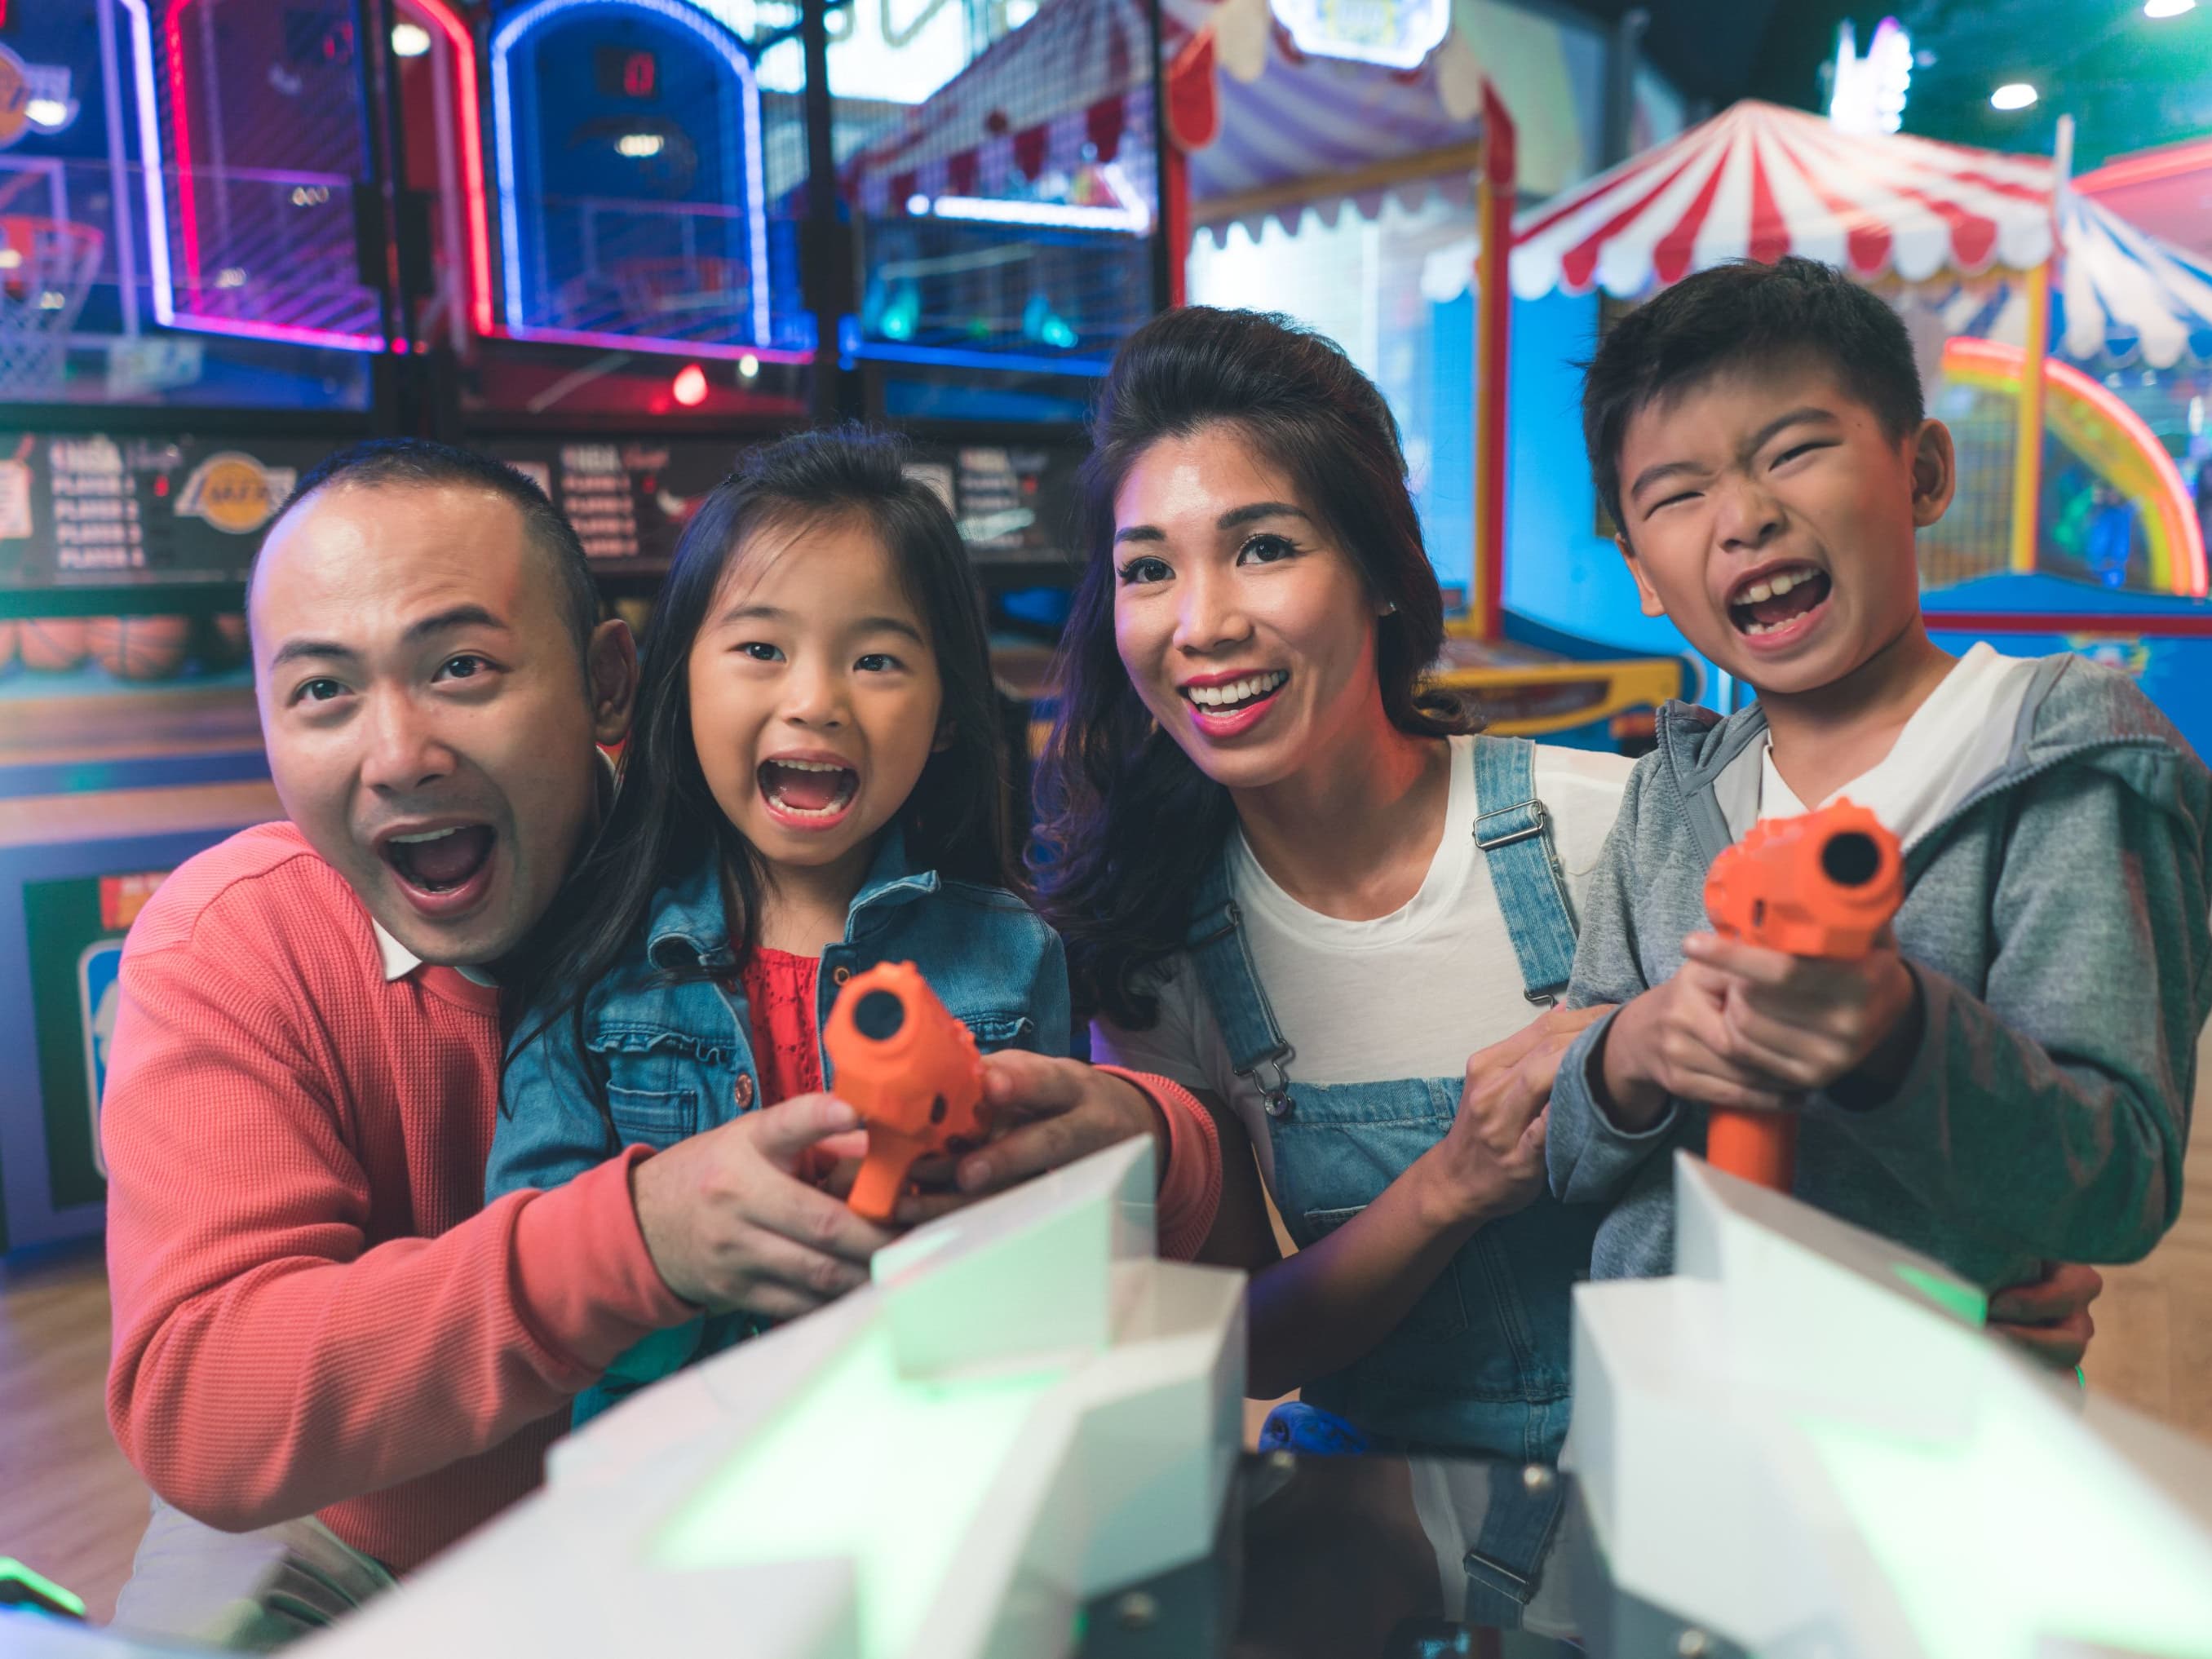 $130 Game Credits at Timezone - Get Deals, Cashback and Rewards with ShopBack GO